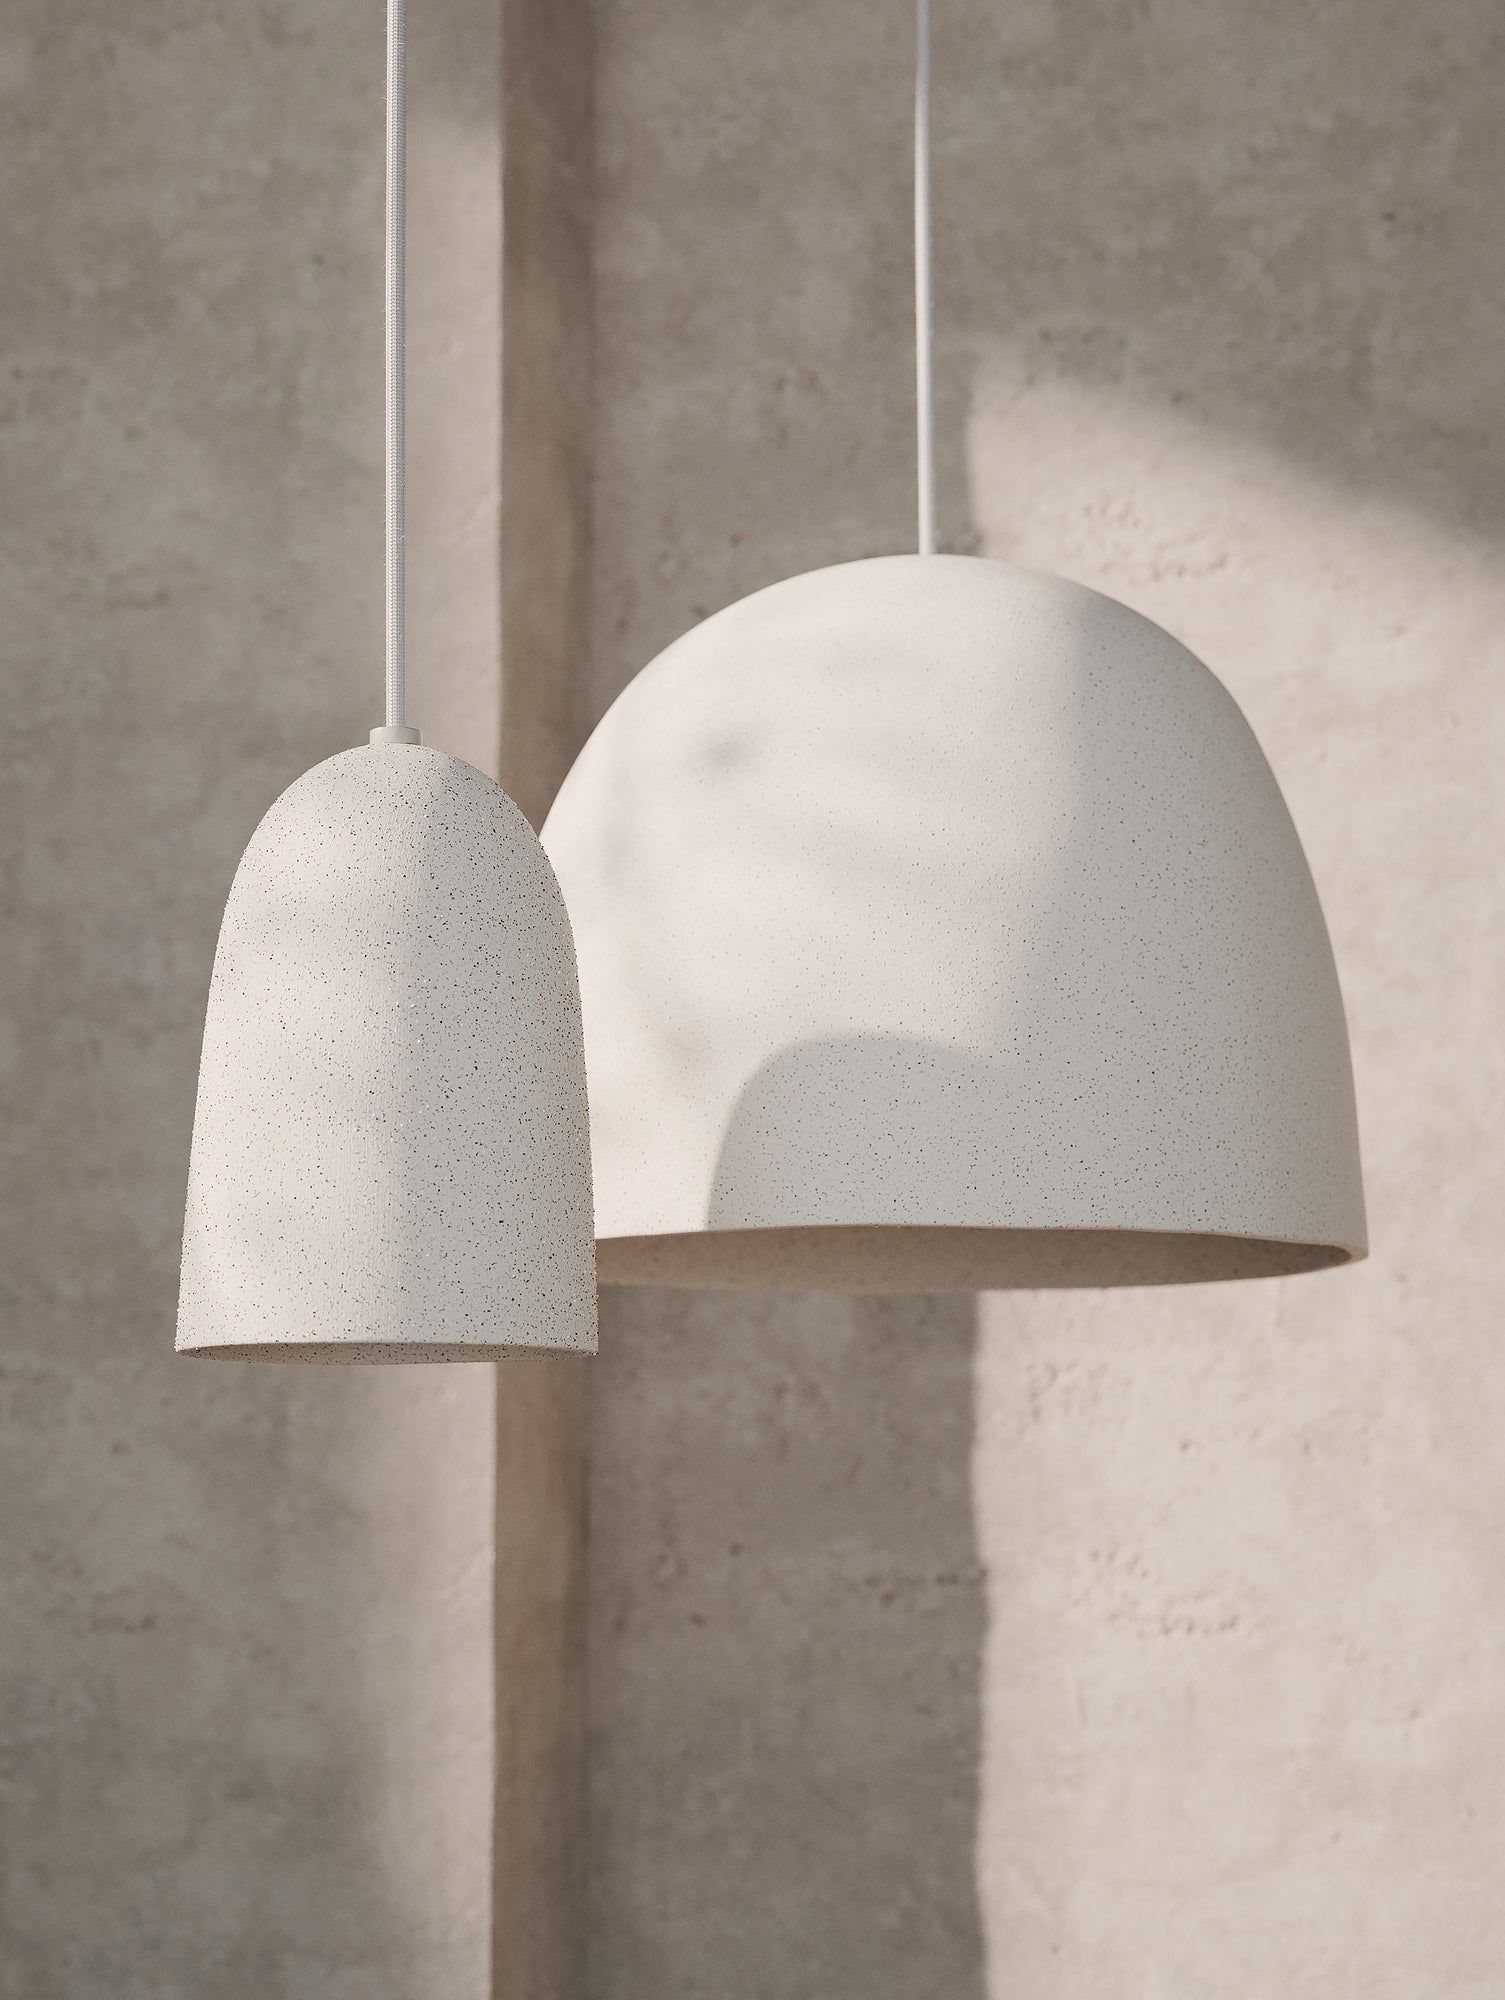 Pendant Lamps Collection Brighten Your Space with Stylish Pendant Lamp Options